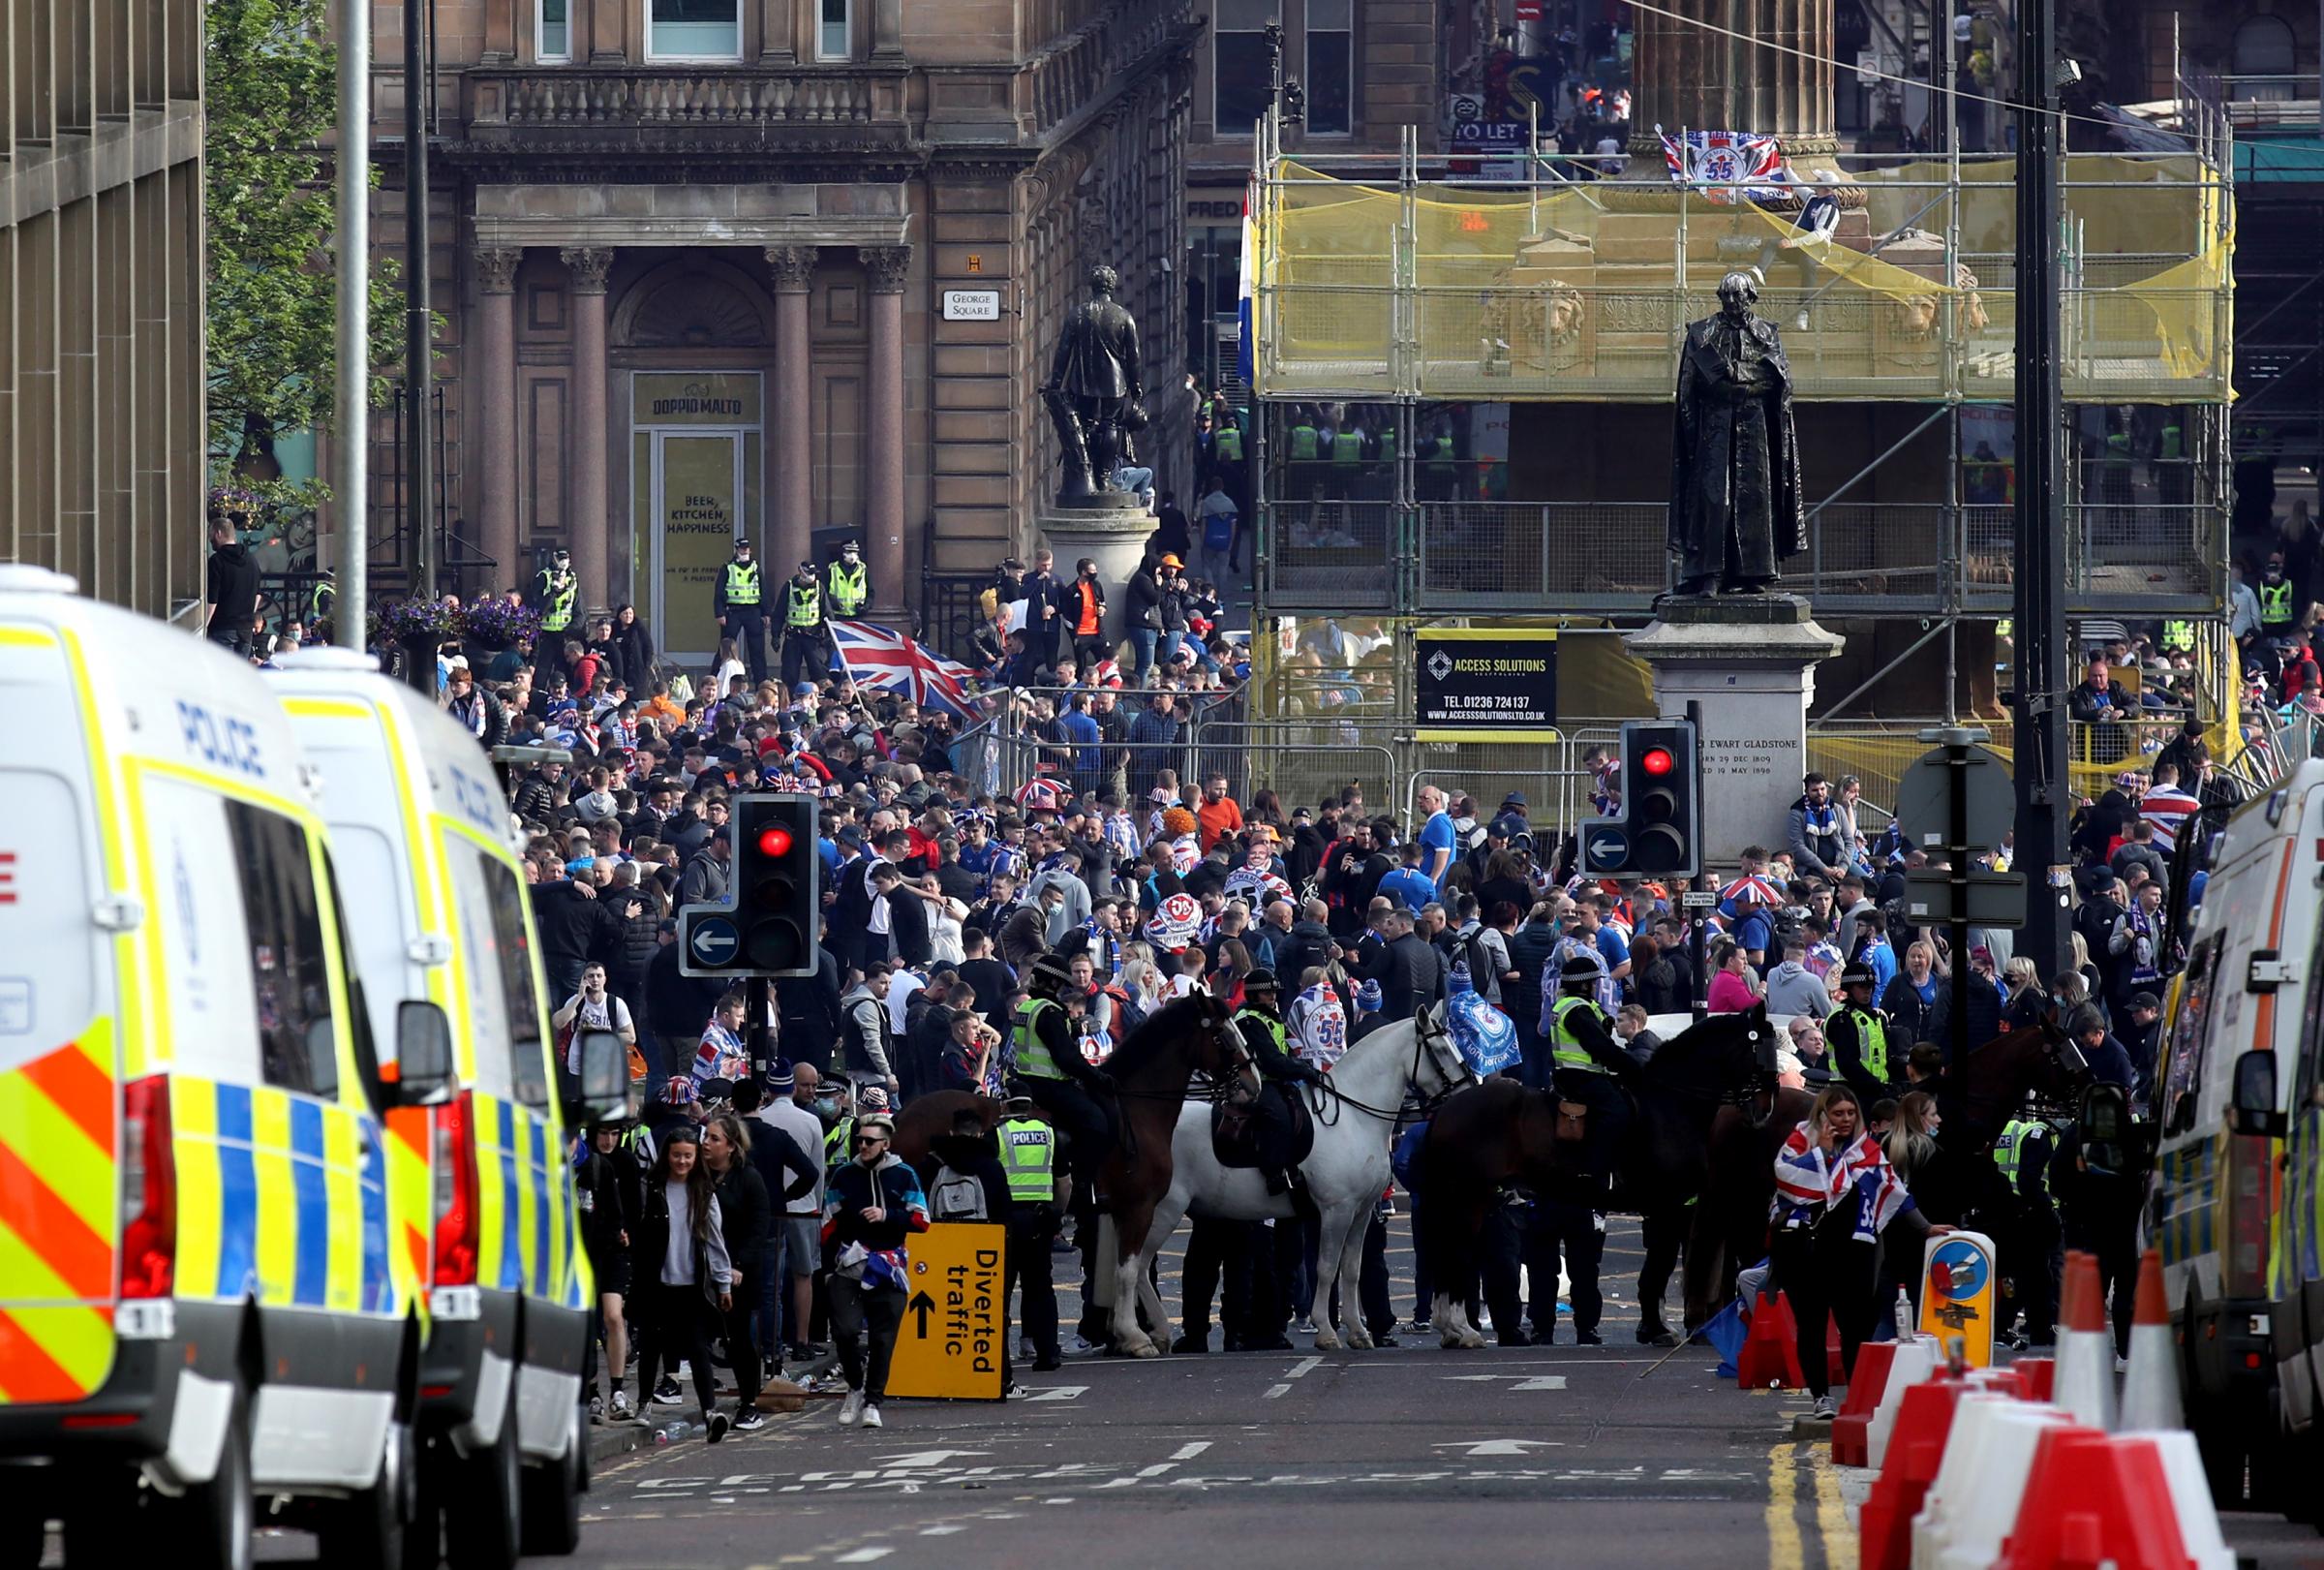 George Square: Two more arrests after Glasgow disorder